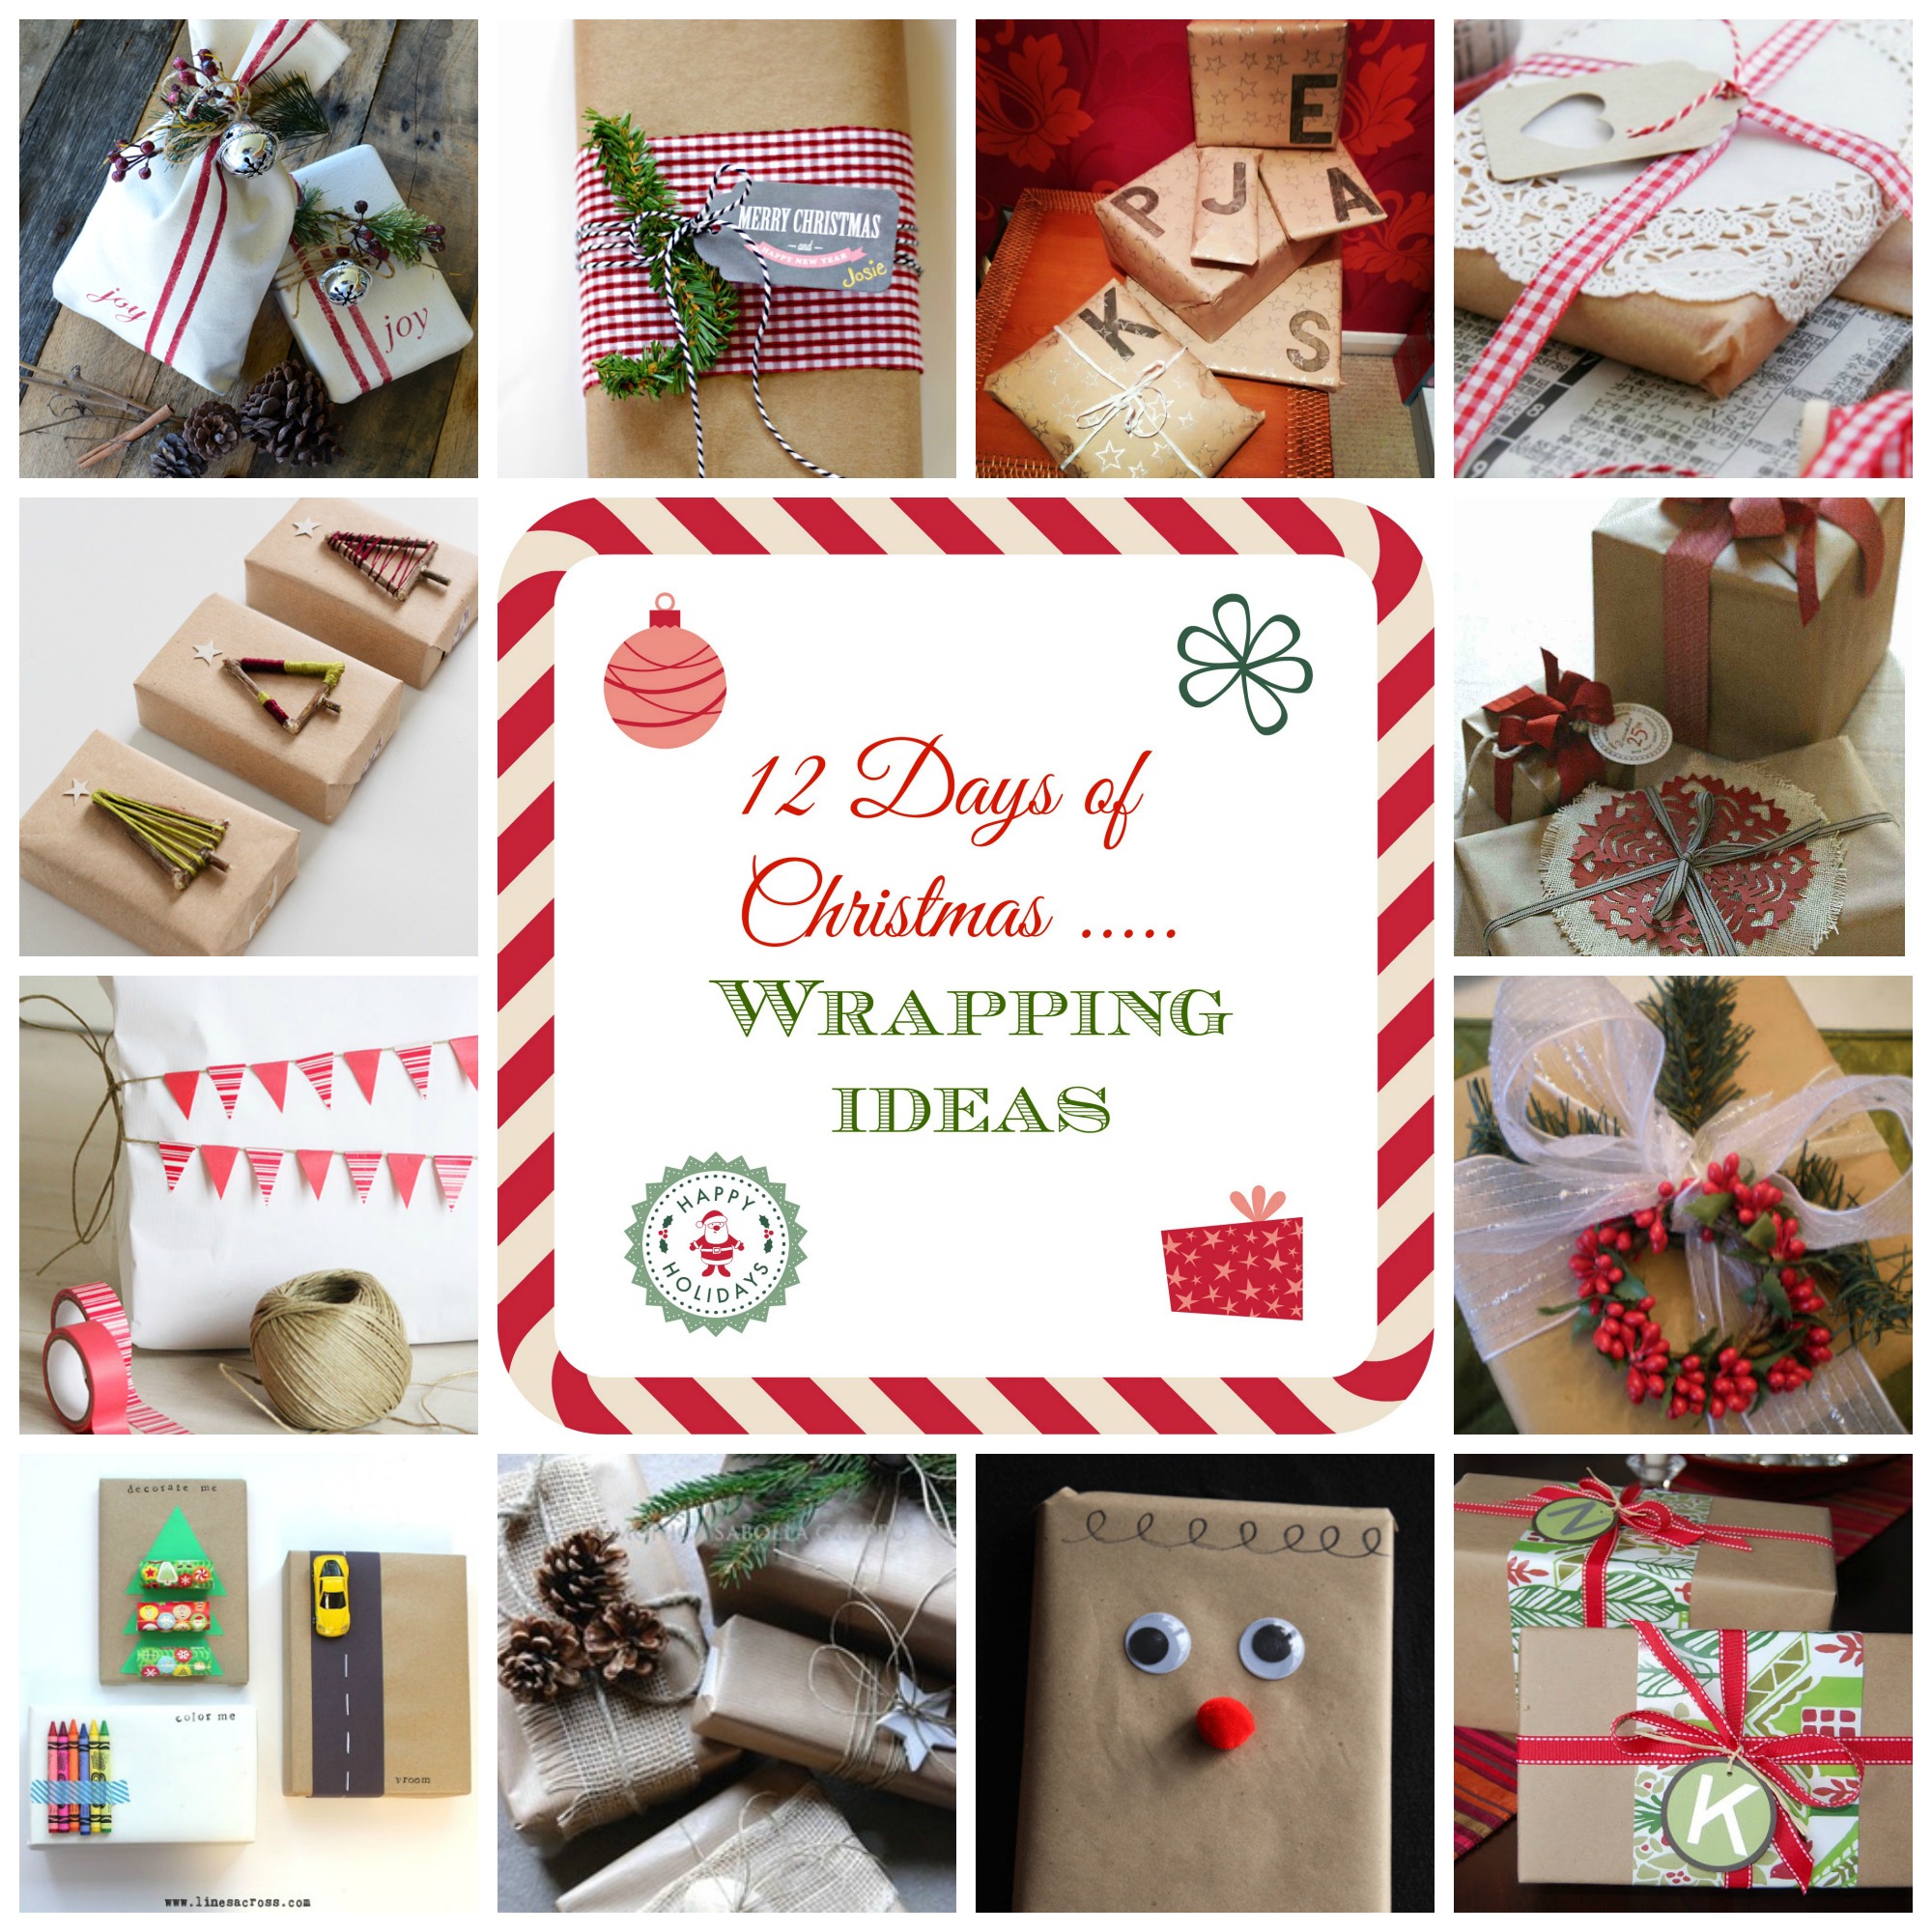 12 Days of Christmas - Wrapping Ideas